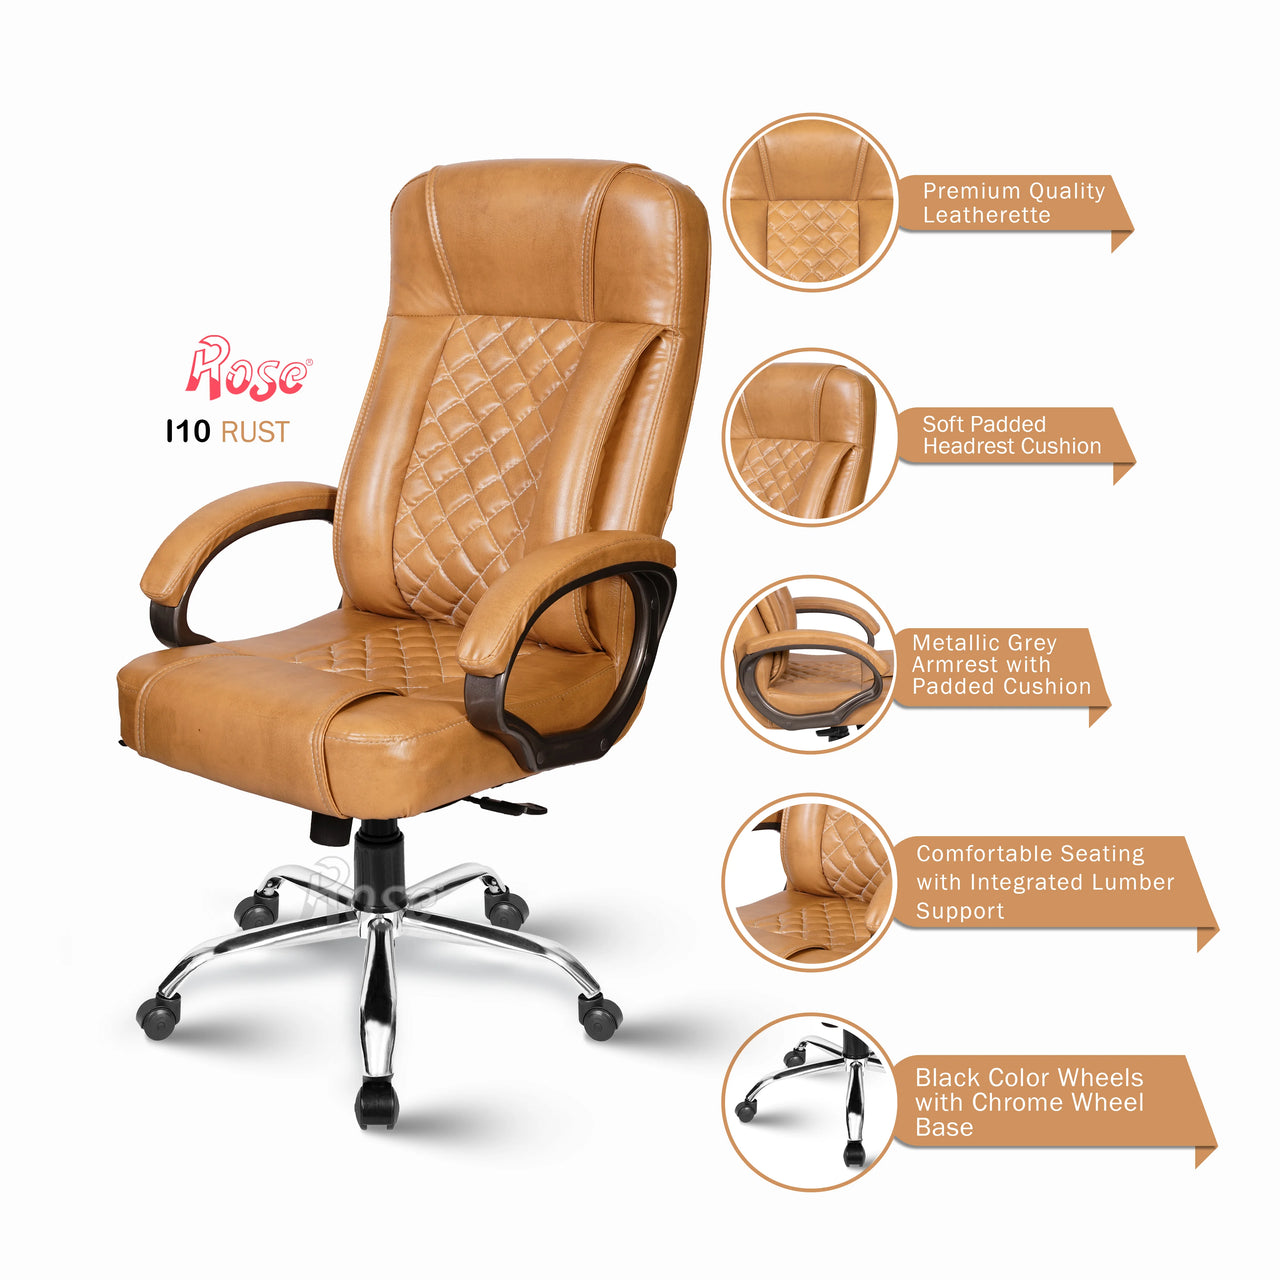 I10 Leatherette Executive High Back Revolving Office Chair (Rust)